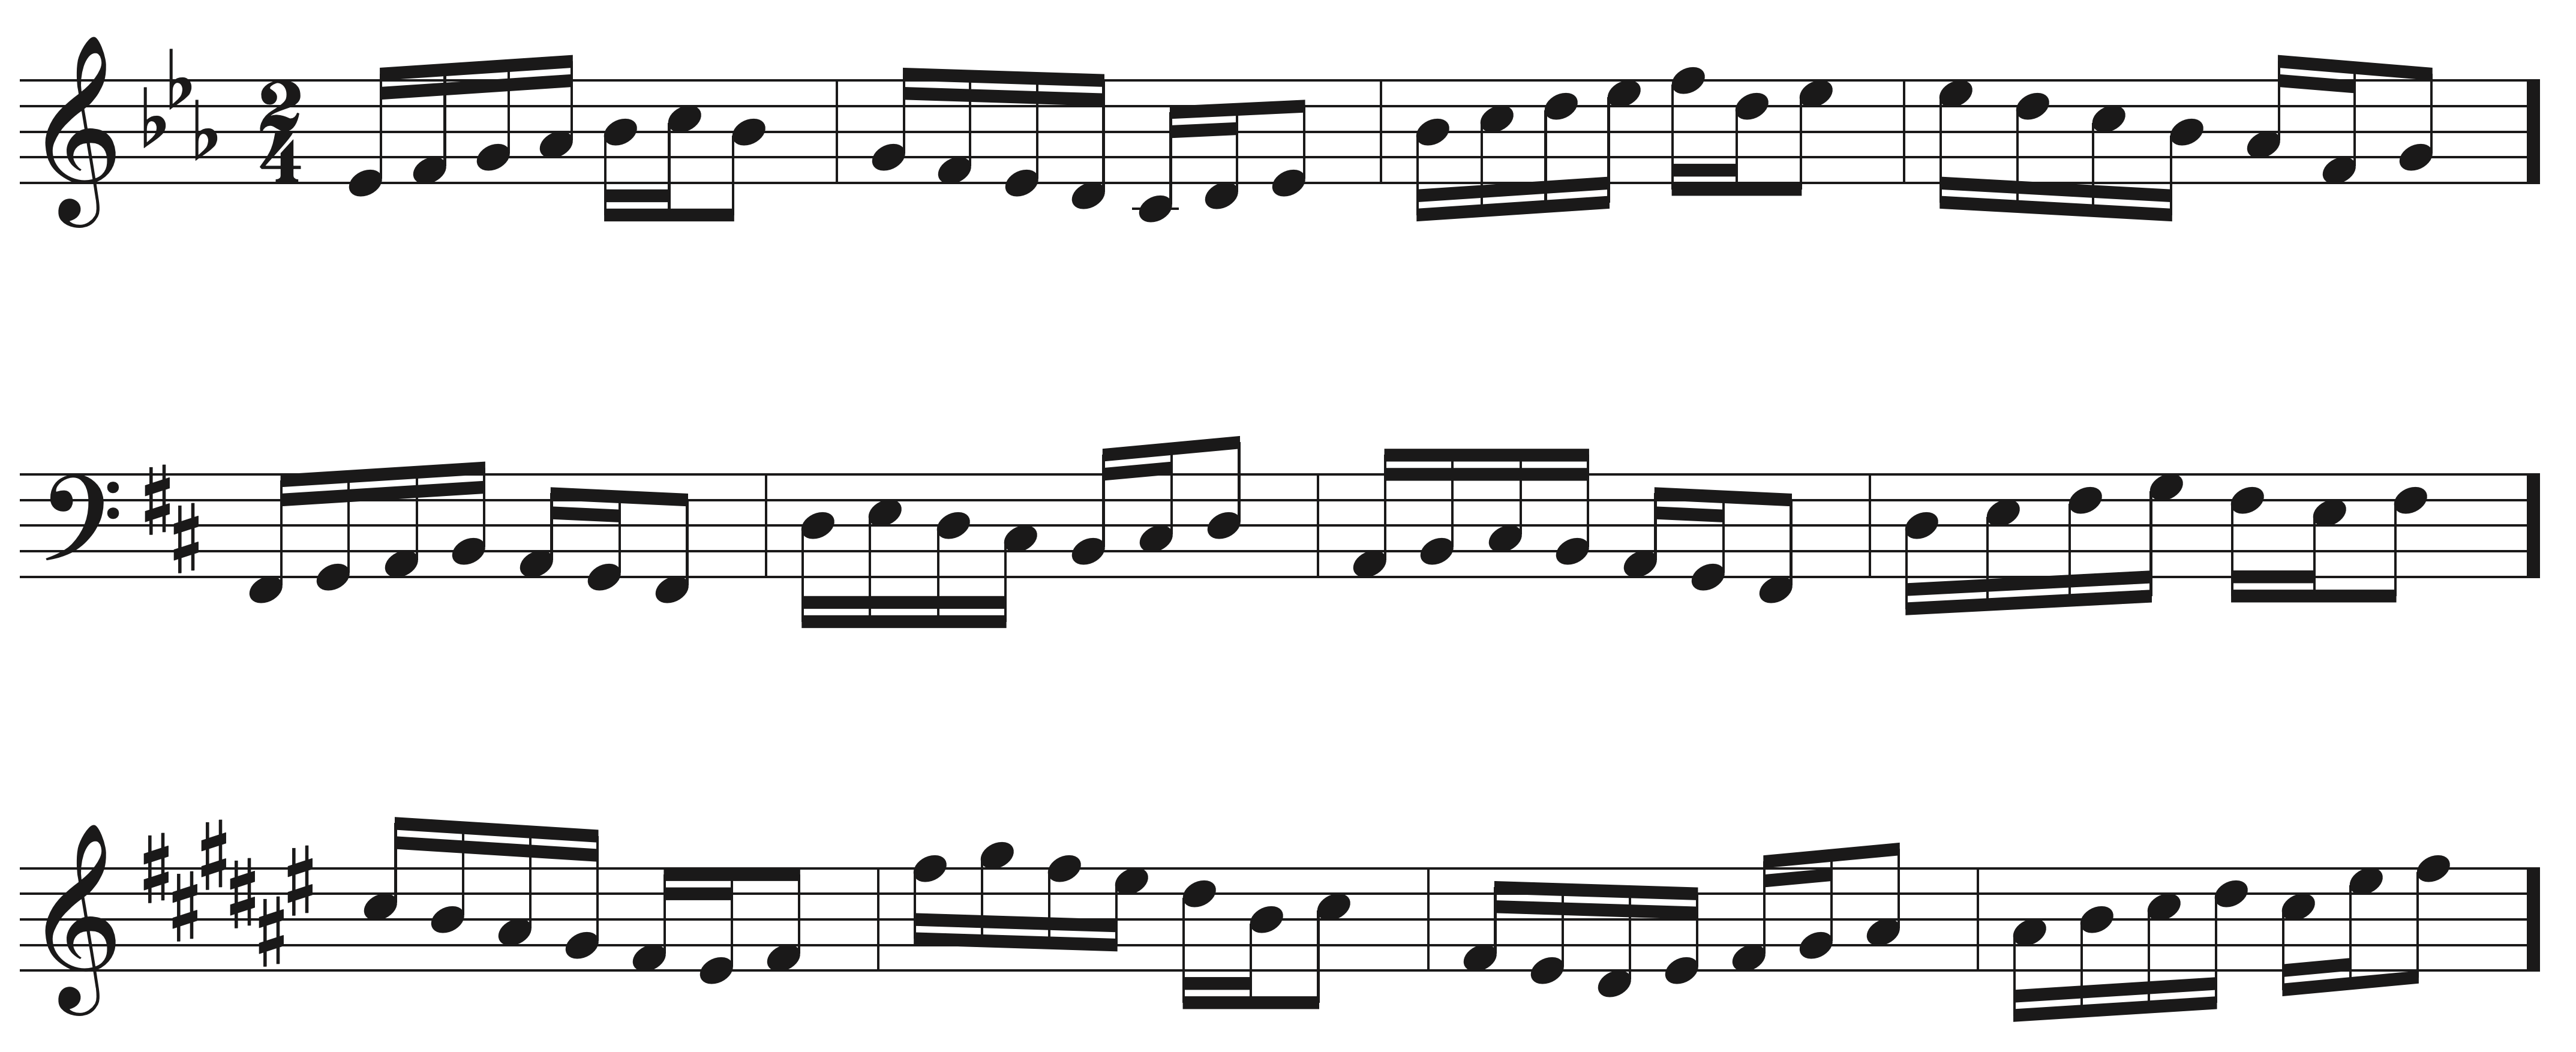 Major Scale Sight Singing exercise example